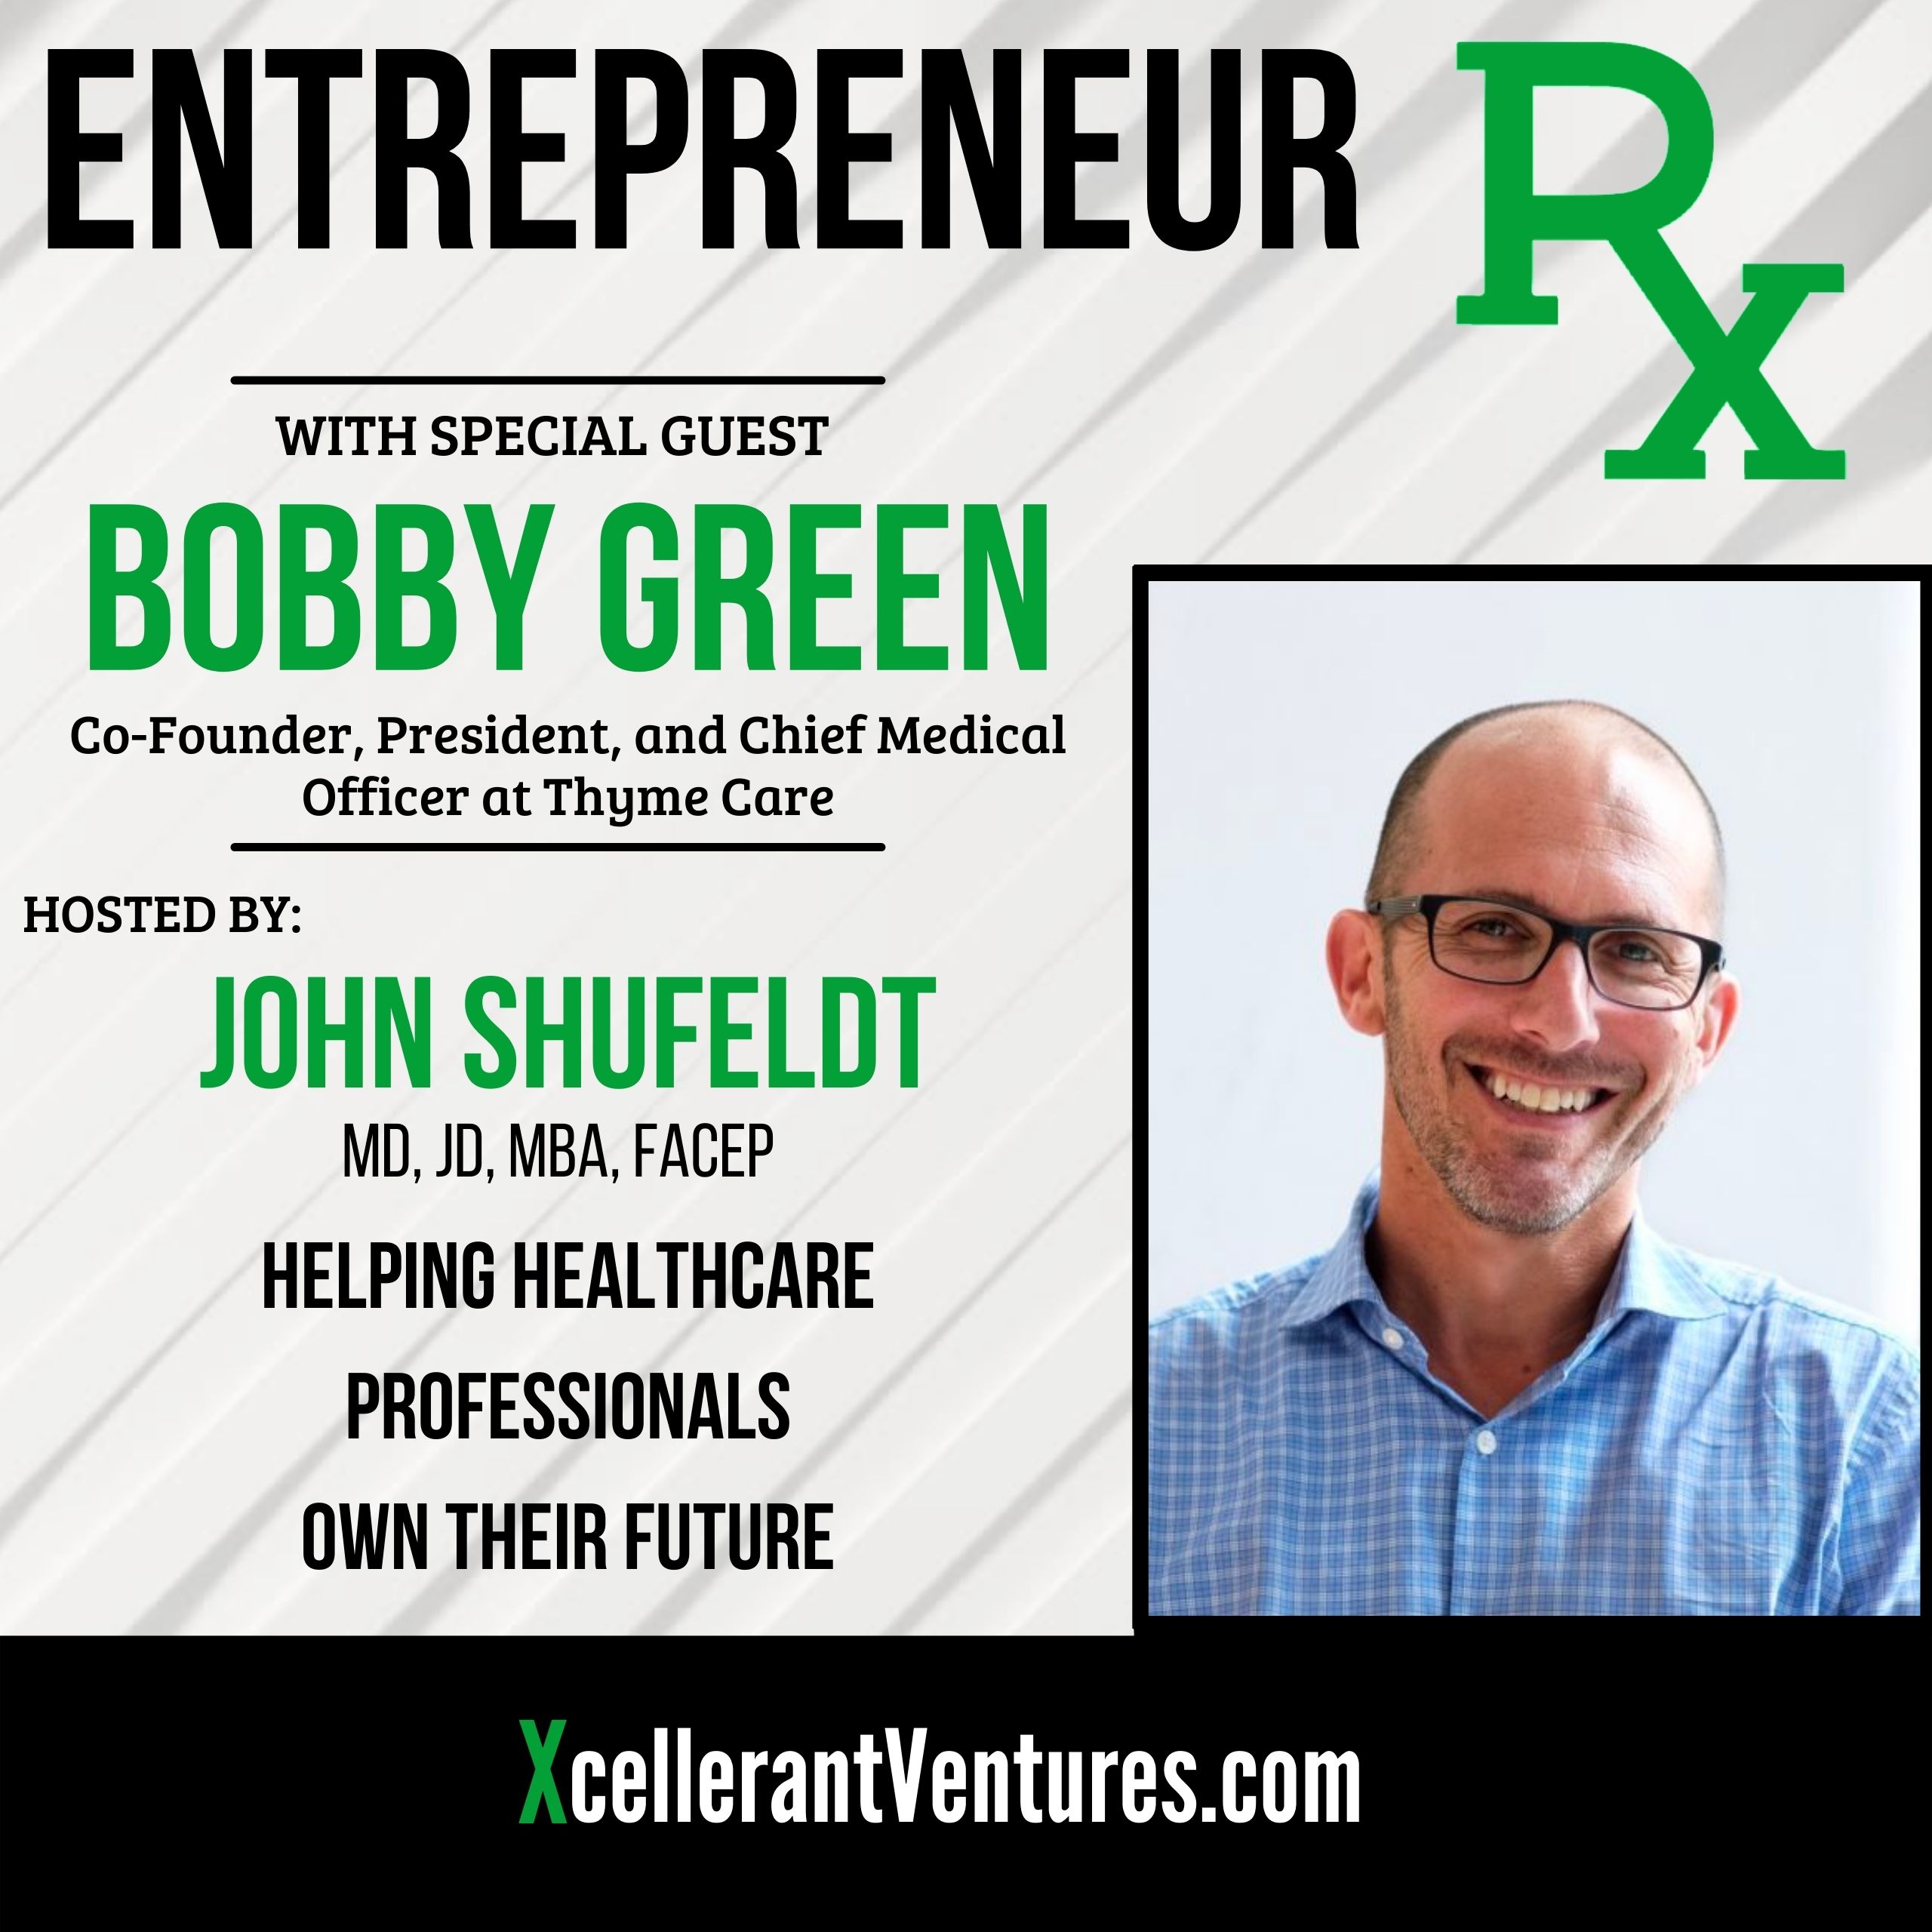 RX36: Entrepreneur Rx Interview with Bobby Green, MD, Co-Founder, President, and Chief Medical Officer at Thyme Care￼